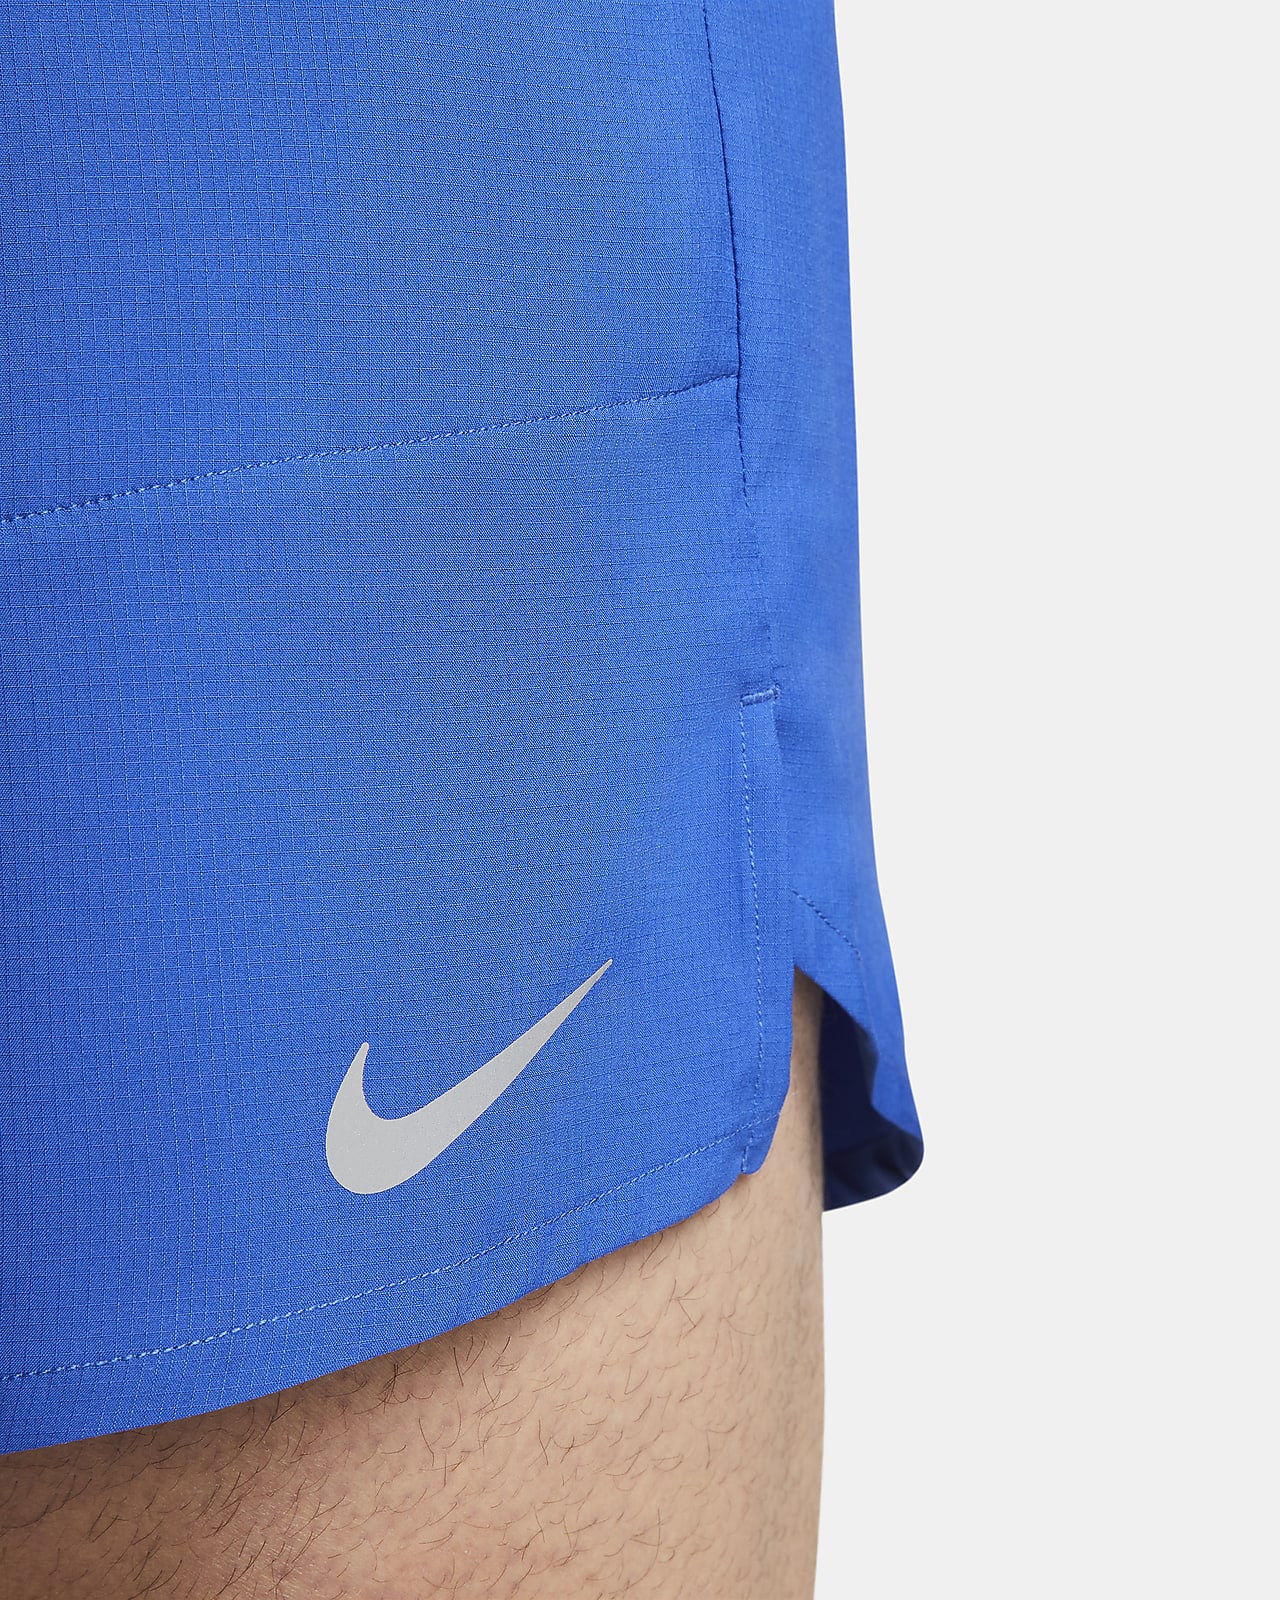 I love my Nike Dri Fit running tights! I love the zipper pocket in the back  and the breathable material.